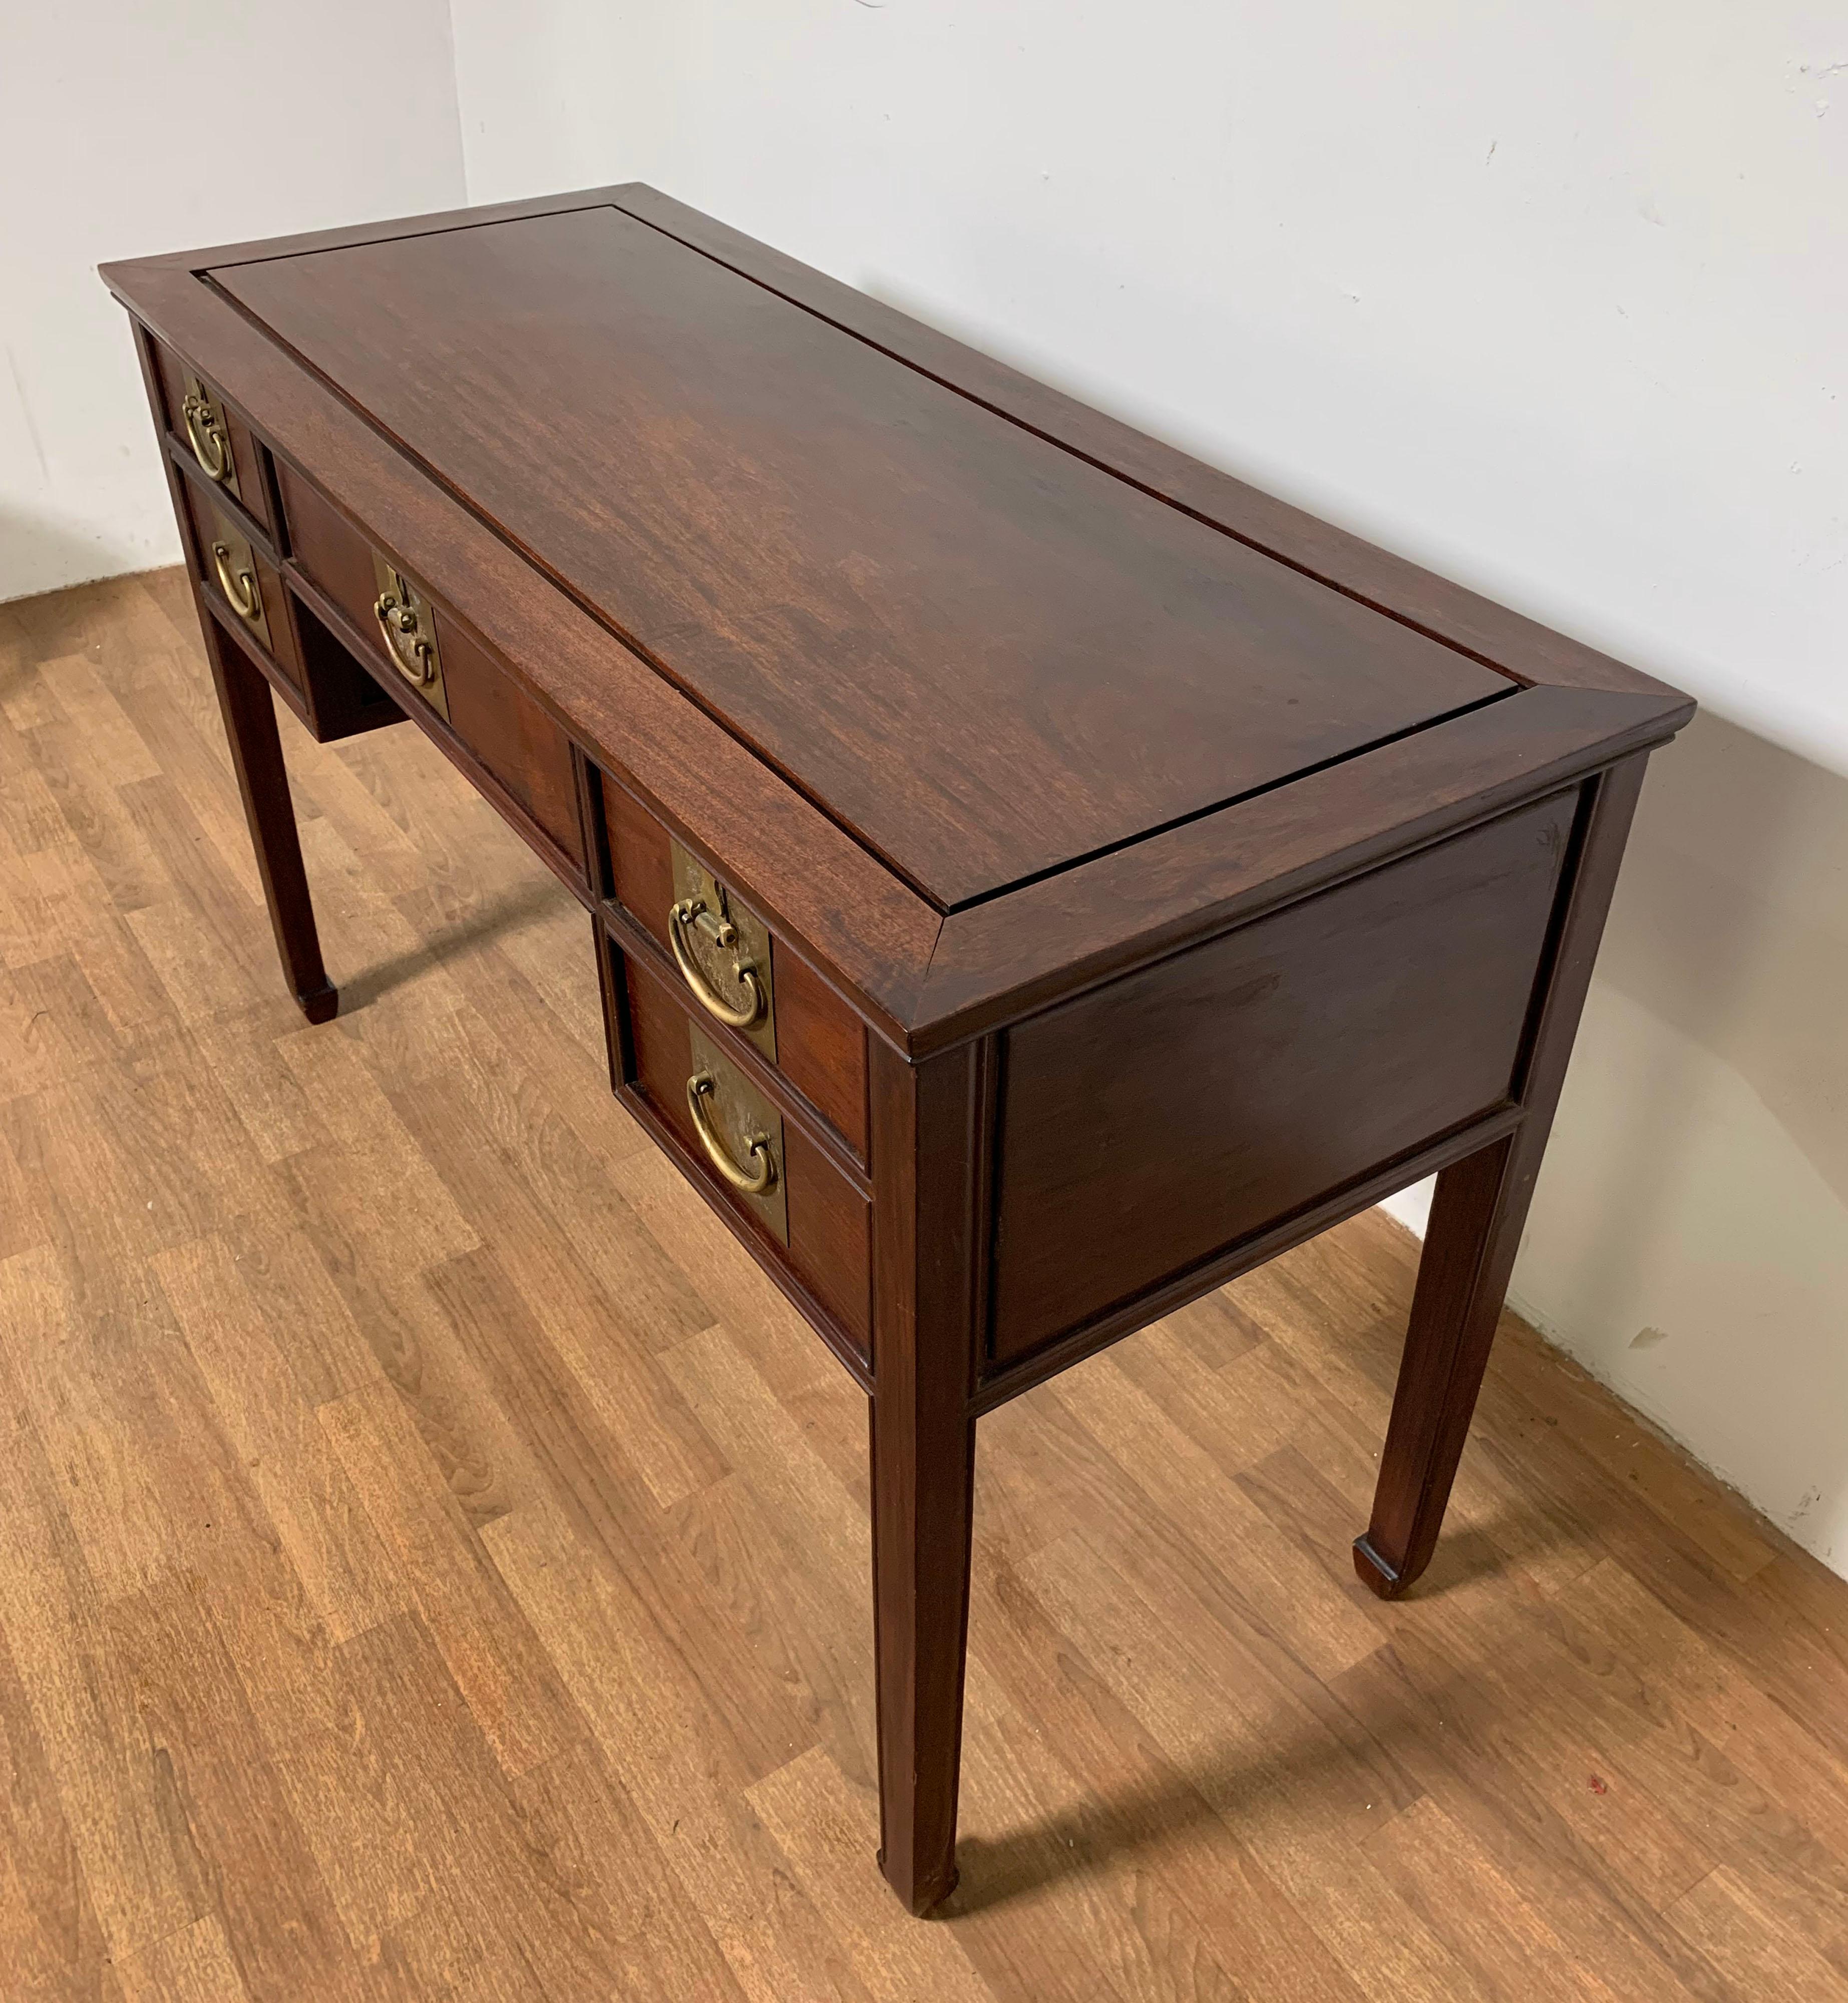 A fine campaign style writing desk in the British Colonial manner dating to the mid 20th century.